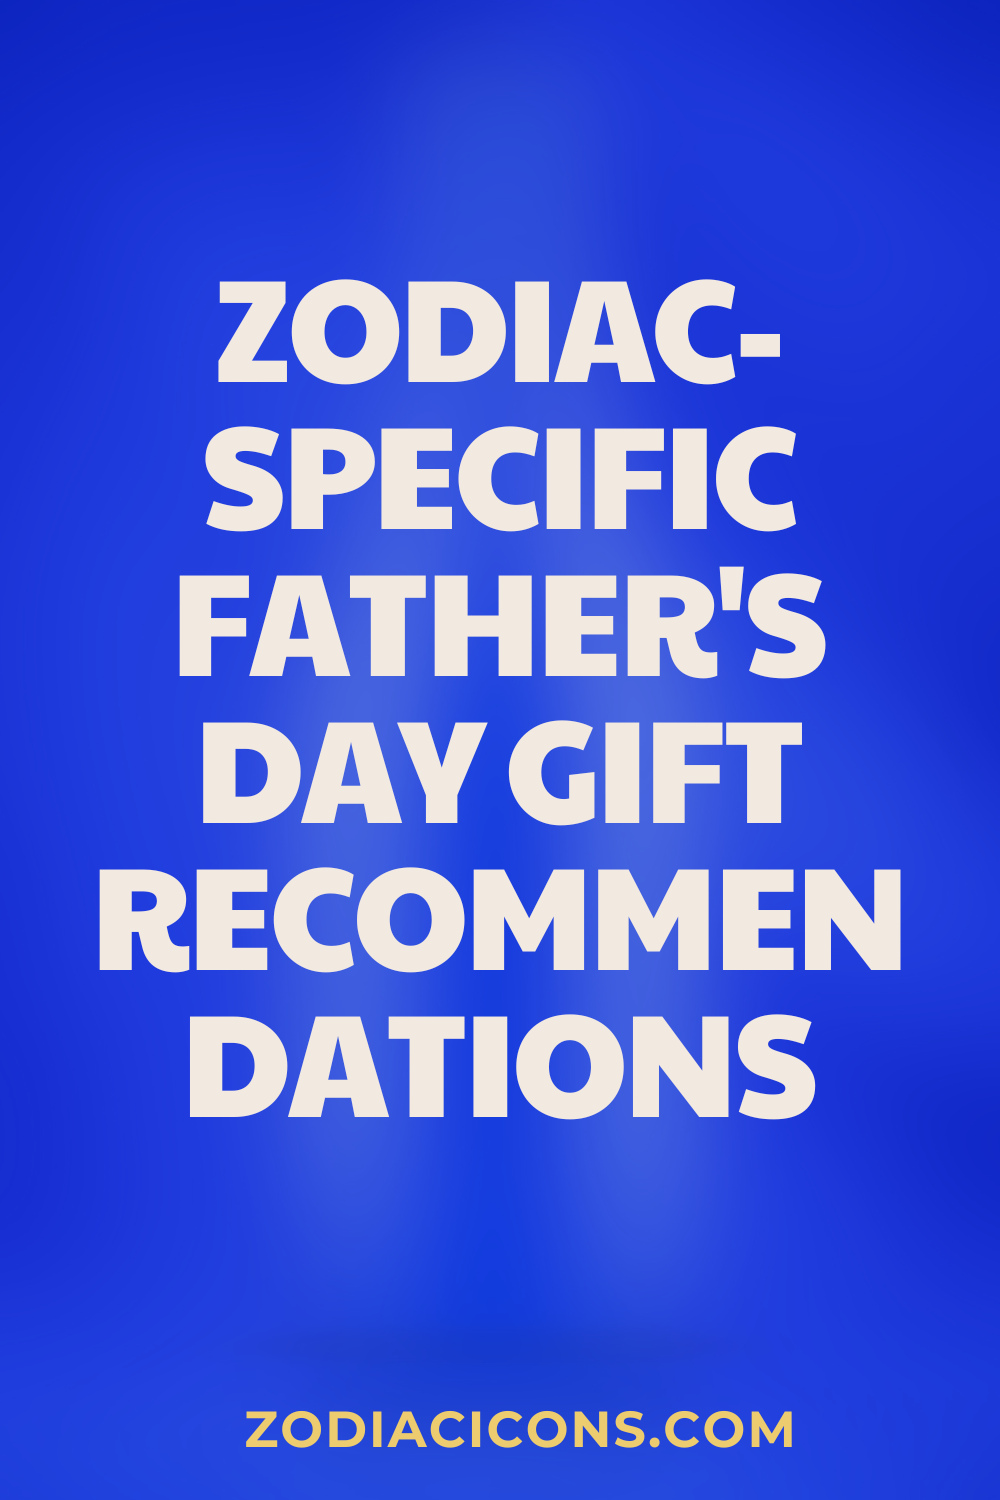 Zodiac-Specific Father's Day Gift Recommendations